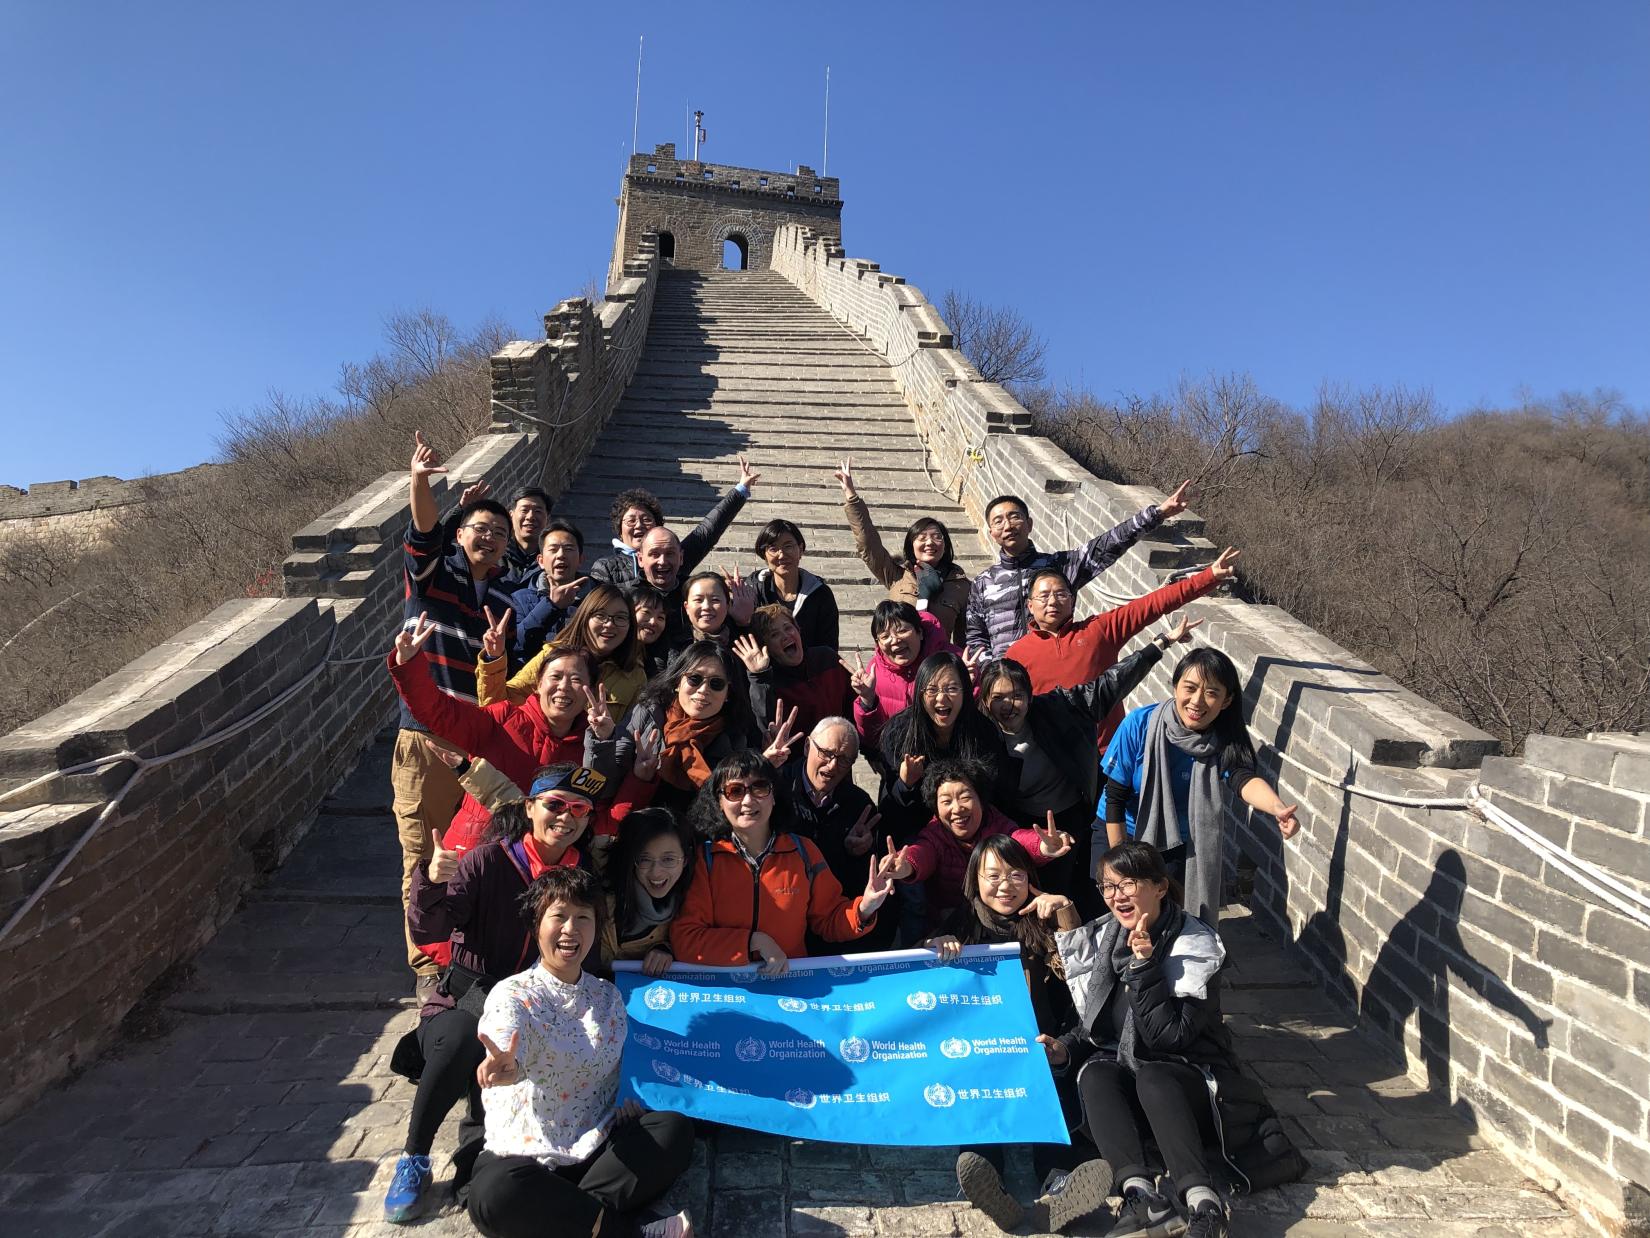 Dr Gauden Galea went to the Great Wall with colleagues of WHO China